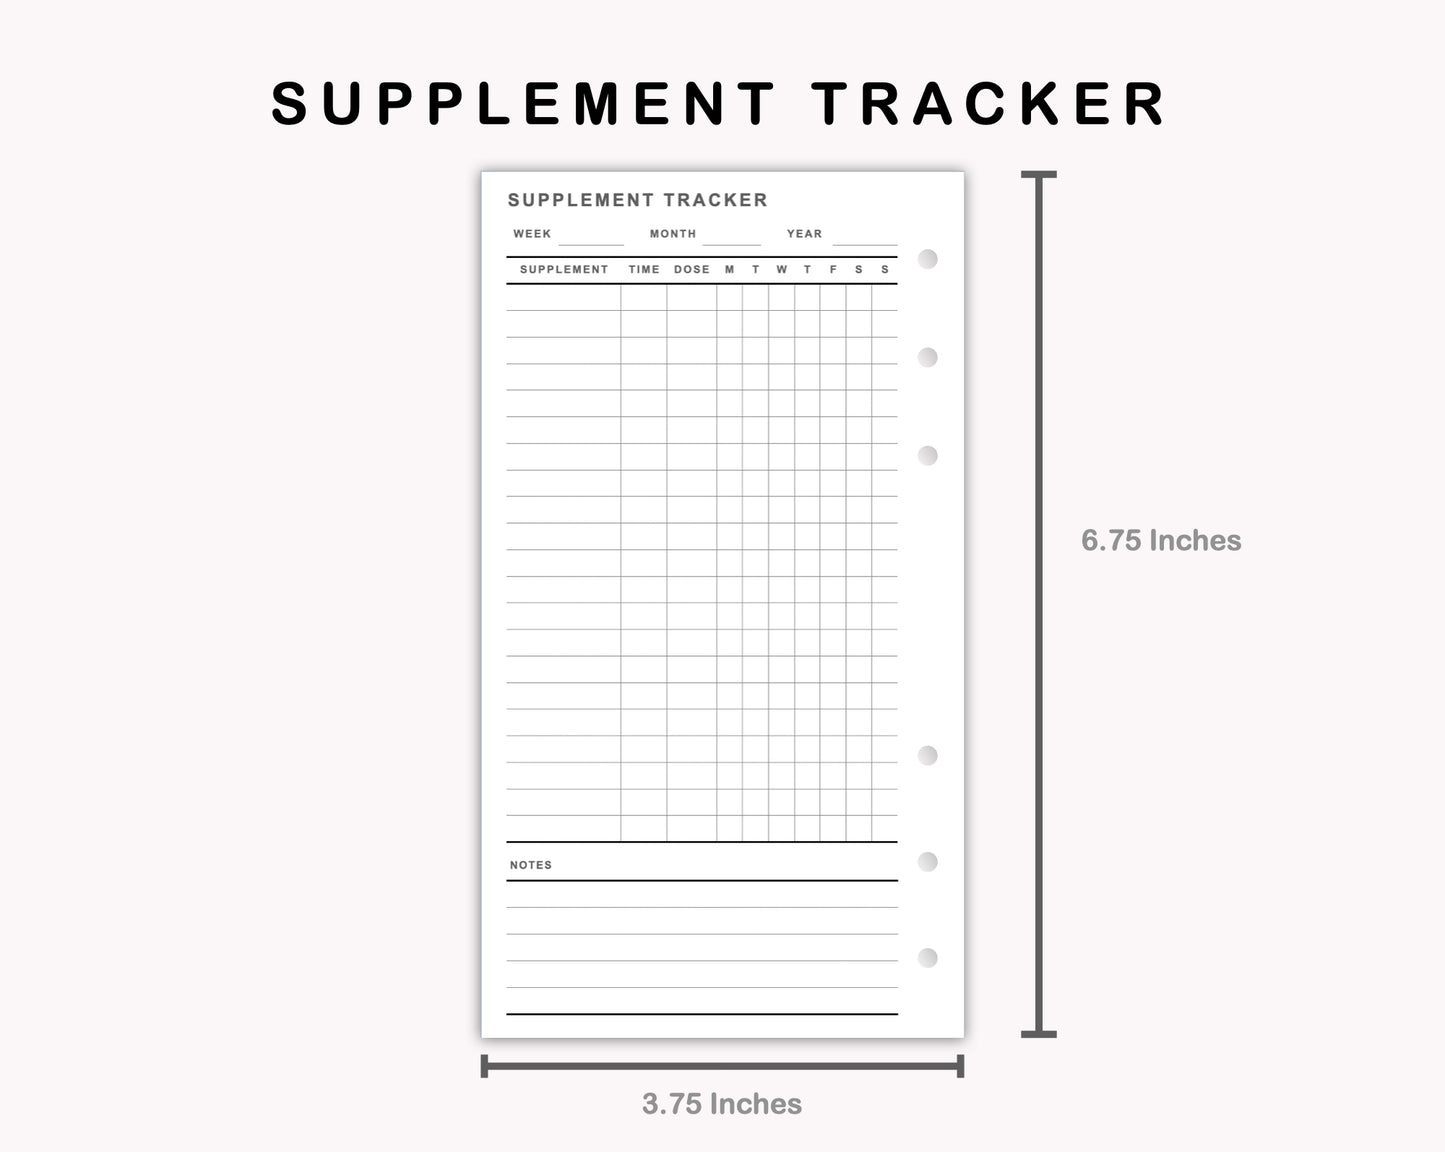 Personal Inserts - Supplement Tracker